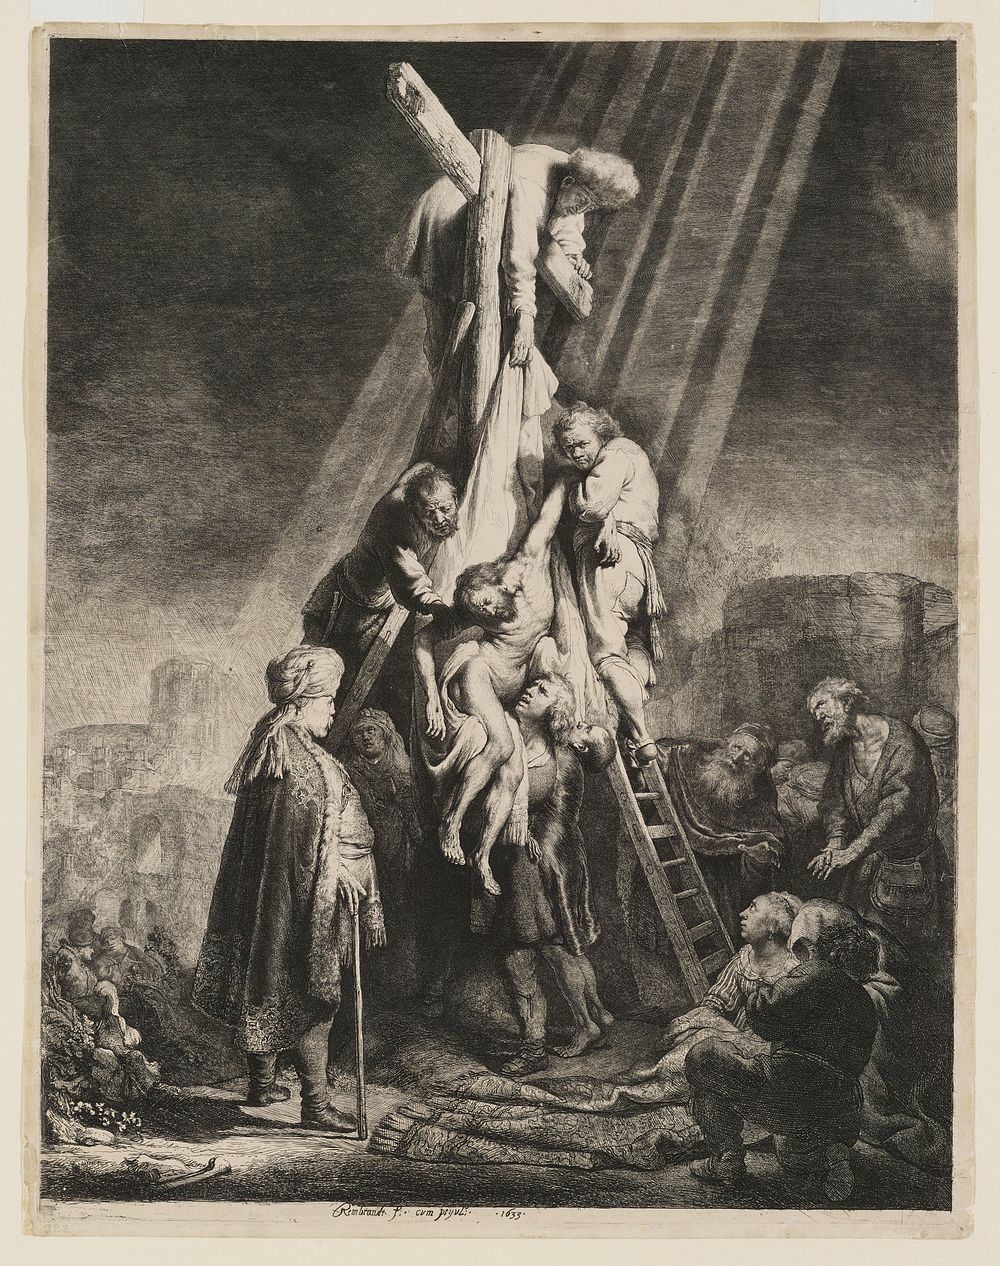 The Descent from the Cross (second plate). Original from the Minneapolis Institute of Art.